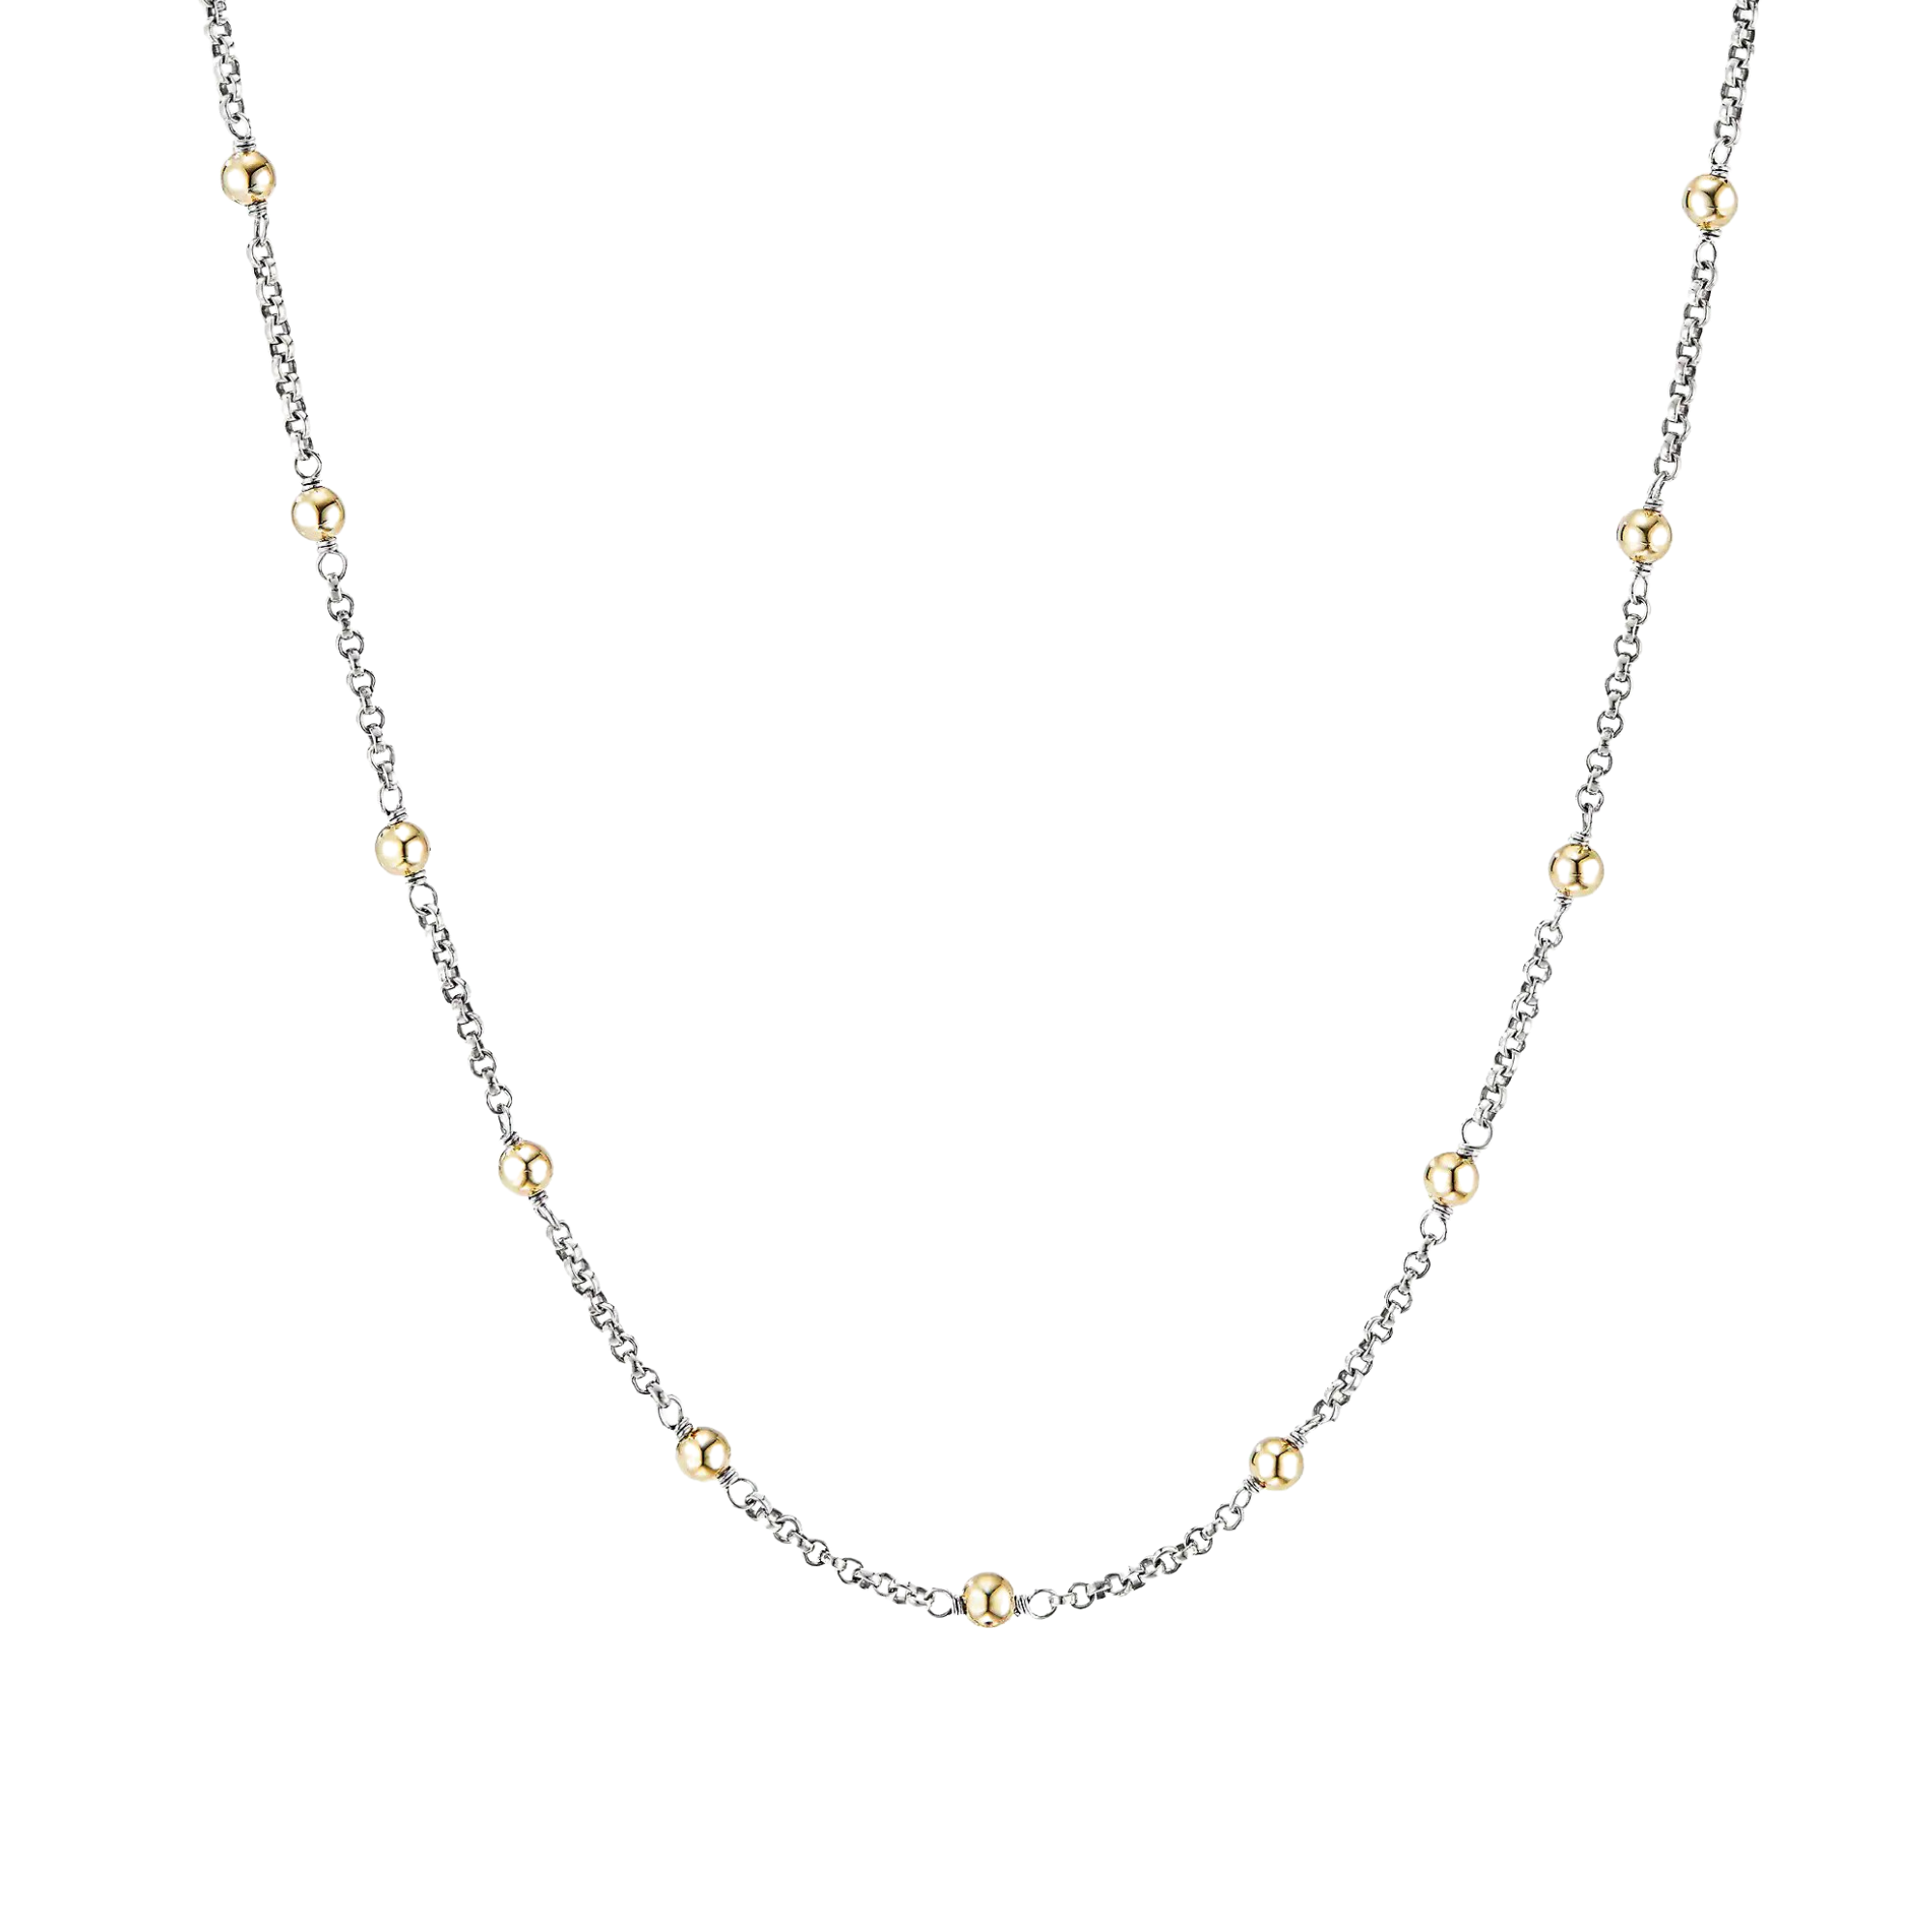 David Yurman Cable Collectibles' Bead and Chain Necklace 18K Yellow Gold Domes, $500